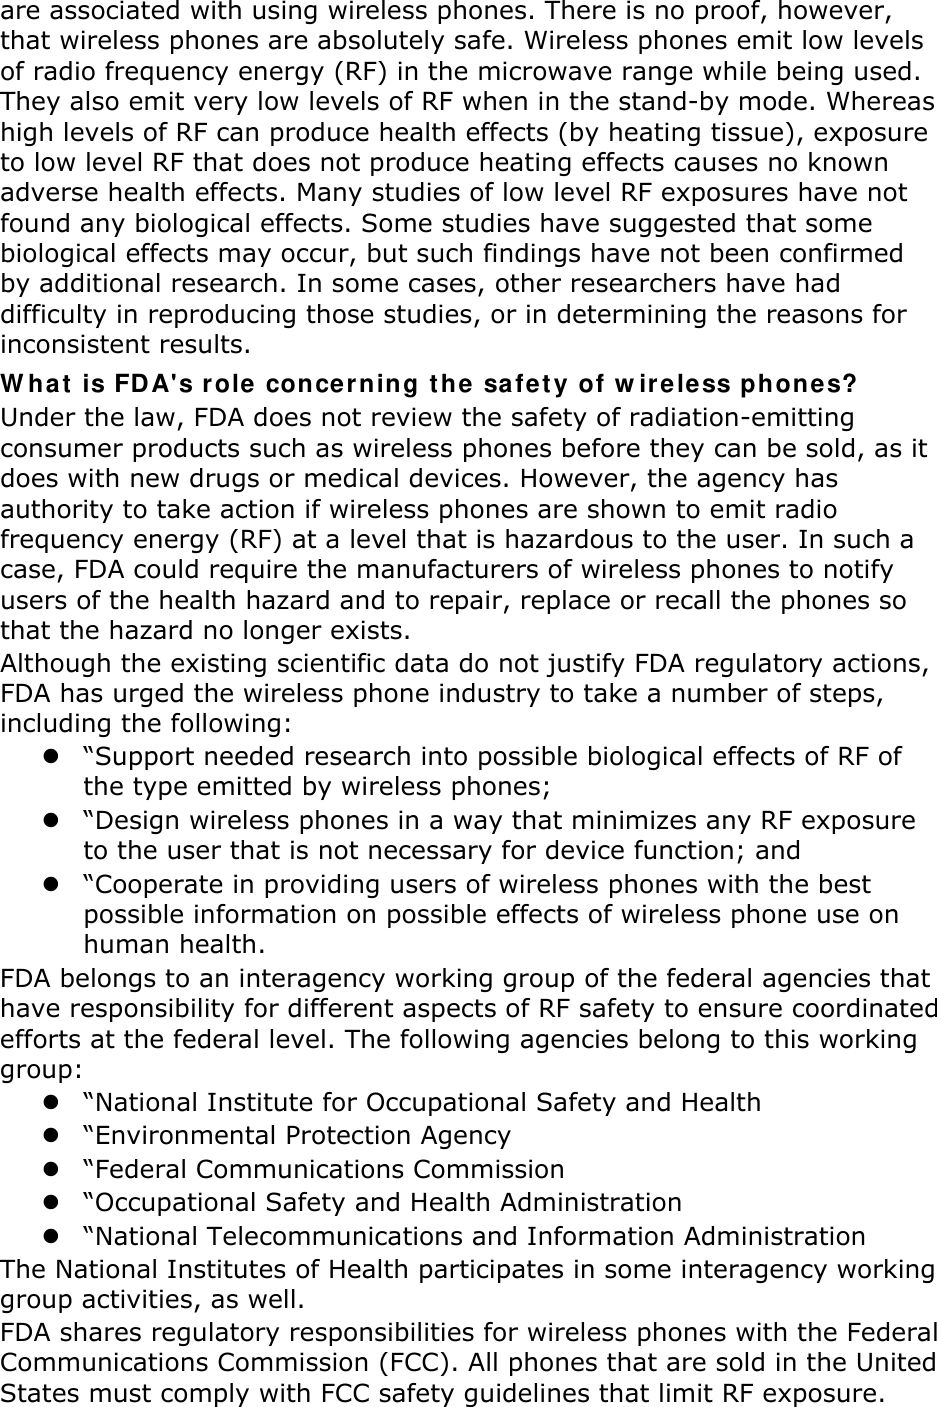 are associated with using wireless phones. There is no proof, however, that wireless phones are absolutely safe. Wireless phones emit low levels of radio frequency energy (RF) in the microwave range while being used. They also emit very low levels of RF when in the stand-by mode. Whereas high levels of RF can produce health effects (by heating tissue), exposure to low level RF that does not produce heating effects causes no known adverse health effects. Many studies of low level RF exposures have not found any biological effects. Some studies have suggested that some biological effects may occur, but such findings have not been confirmed by additional research. In some cases, other researchers have had difficulty in reproducing those studies, or in determining the reasons for inconsistent results. W hat  is FDA&apos;s r ole  conce rning t he sa fet y of w ireless phones? Under the law, FDA does not review the safety of radiation-emitting consumer products such as wireless phones before they can be sold, as it does with new drugs or medical devices. However, the agency has authority to take action if wireless phones are shown to emit radio frequency energy (RF) at a level that is hazardous to the user. In such a case, FDA could require the manufacturers of wireless phones to notify users of the health hazard and to repair, replace or recall the phones so that the hazard no longer exists. Although the existing scientific data do not justify FDA regulatory actions, FDA has urged the wireless phone industry to take a number of steps, including the following:  “Support needed research into possible biological effects of RF of the type emitted by wireless phones;  “Design wireless phones in a way that minimizes any RF exposure to the user that is not necessary for device function; and  “Cooperate in providing users of wireless phones with the best possible information on possible effects of wireless phone use on human health. FDA belongs to an interagency working group of the federal agencies that have responsibility for different aspects of RF safety to ensure coordinated efforts at the federal level. The following agencies belong to this working group:  “National Institute for Occupational Safety and Health  “Environmental Protection Agency  “Federal Communications Commission  “Occupational Safety and Health Administration  “National Telecommunications and Information Administration The National Institutes of Health participates in some interagency working group activities, as well. FDA shares regulatory responsibilities for wireless phones with the Federal Communications Commission (FCC). All phones that are sold in the United States must comply with FCC safety guidelines that limit RF exposure. 